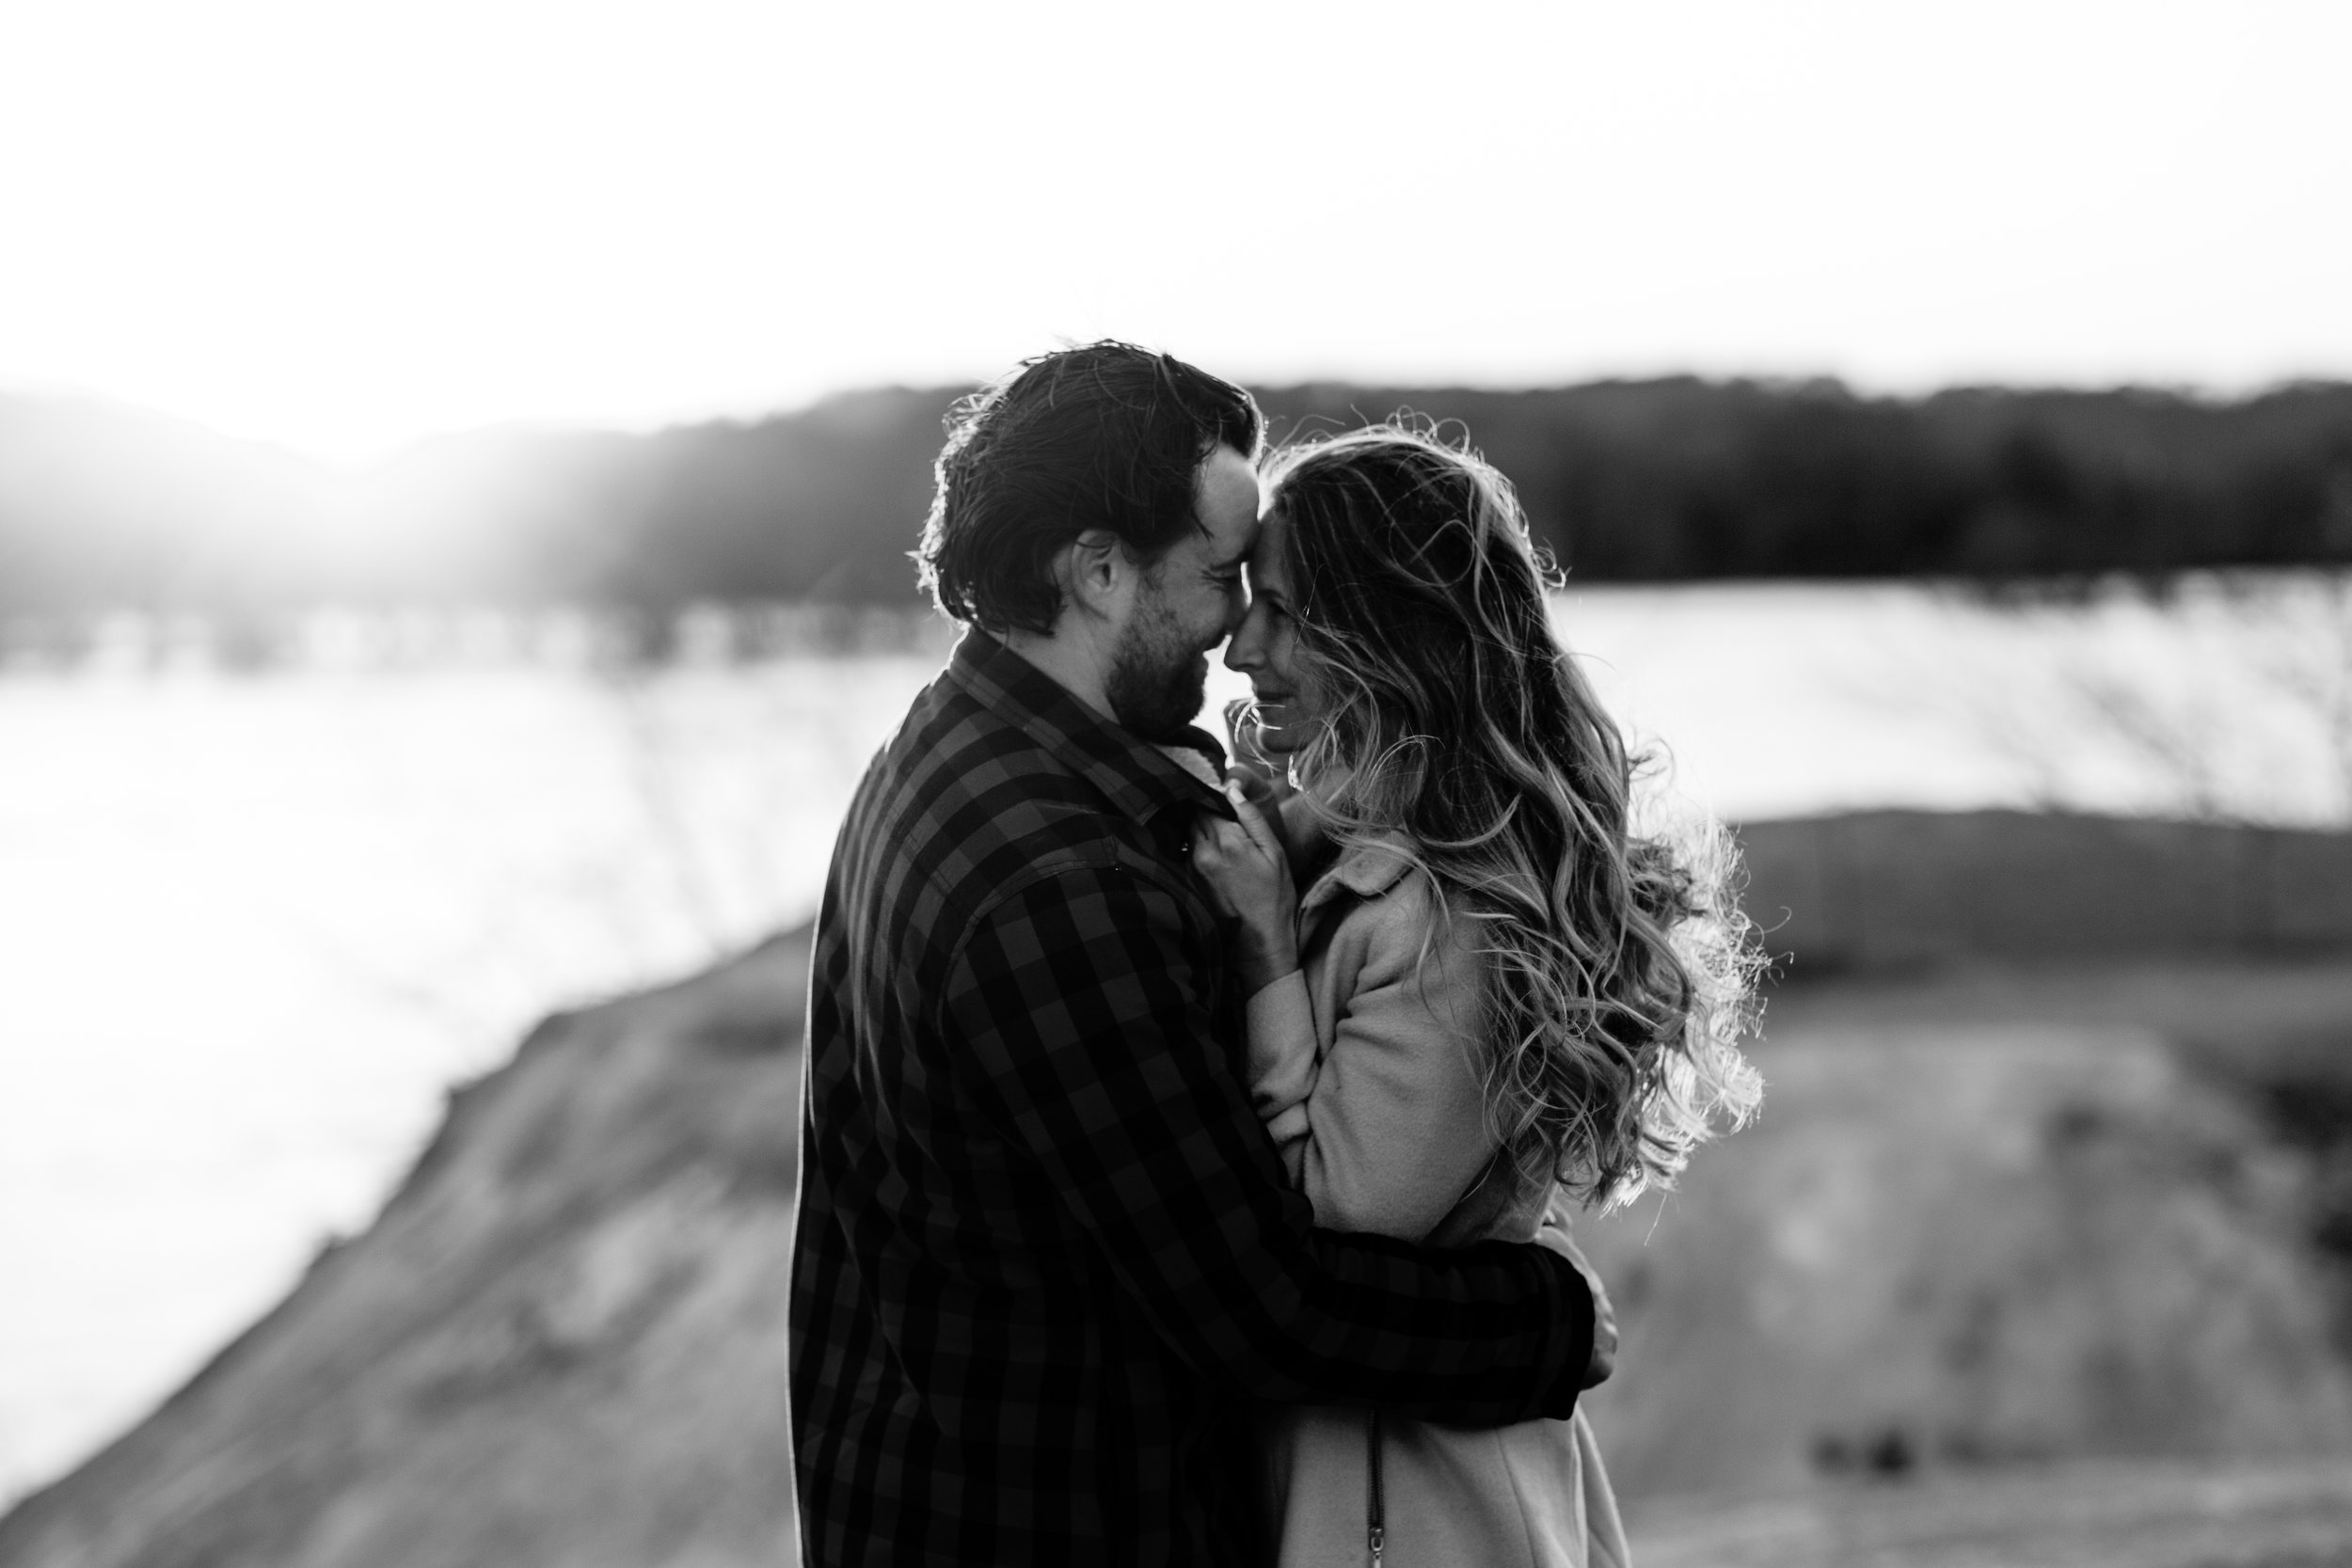 nicole-daacke-photography-white-cliffs-of-conoy-in-lancaster-pa-pennsylvania-adventure-session-adventure-elopement-photographer-engagement session-in-lancaster-pa-photographer-golden-sunset-winter-solstice-wedding-riverside-elopement-5356.jpg